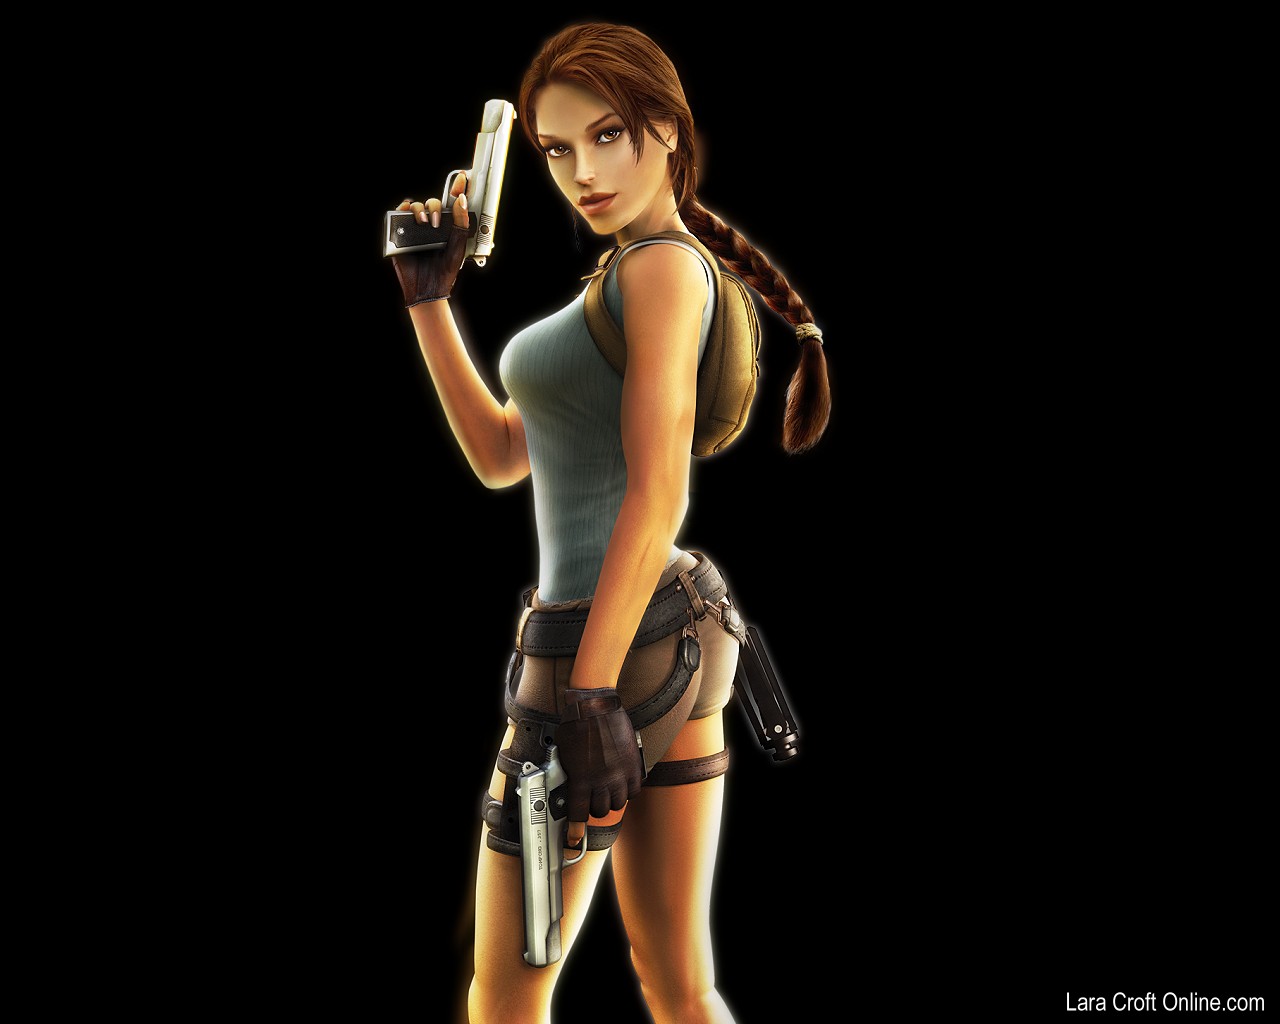 Tomb Raider Anniversary 2007 Picture Gallery Section Page Two / Lara Croft Online Tomb Raider